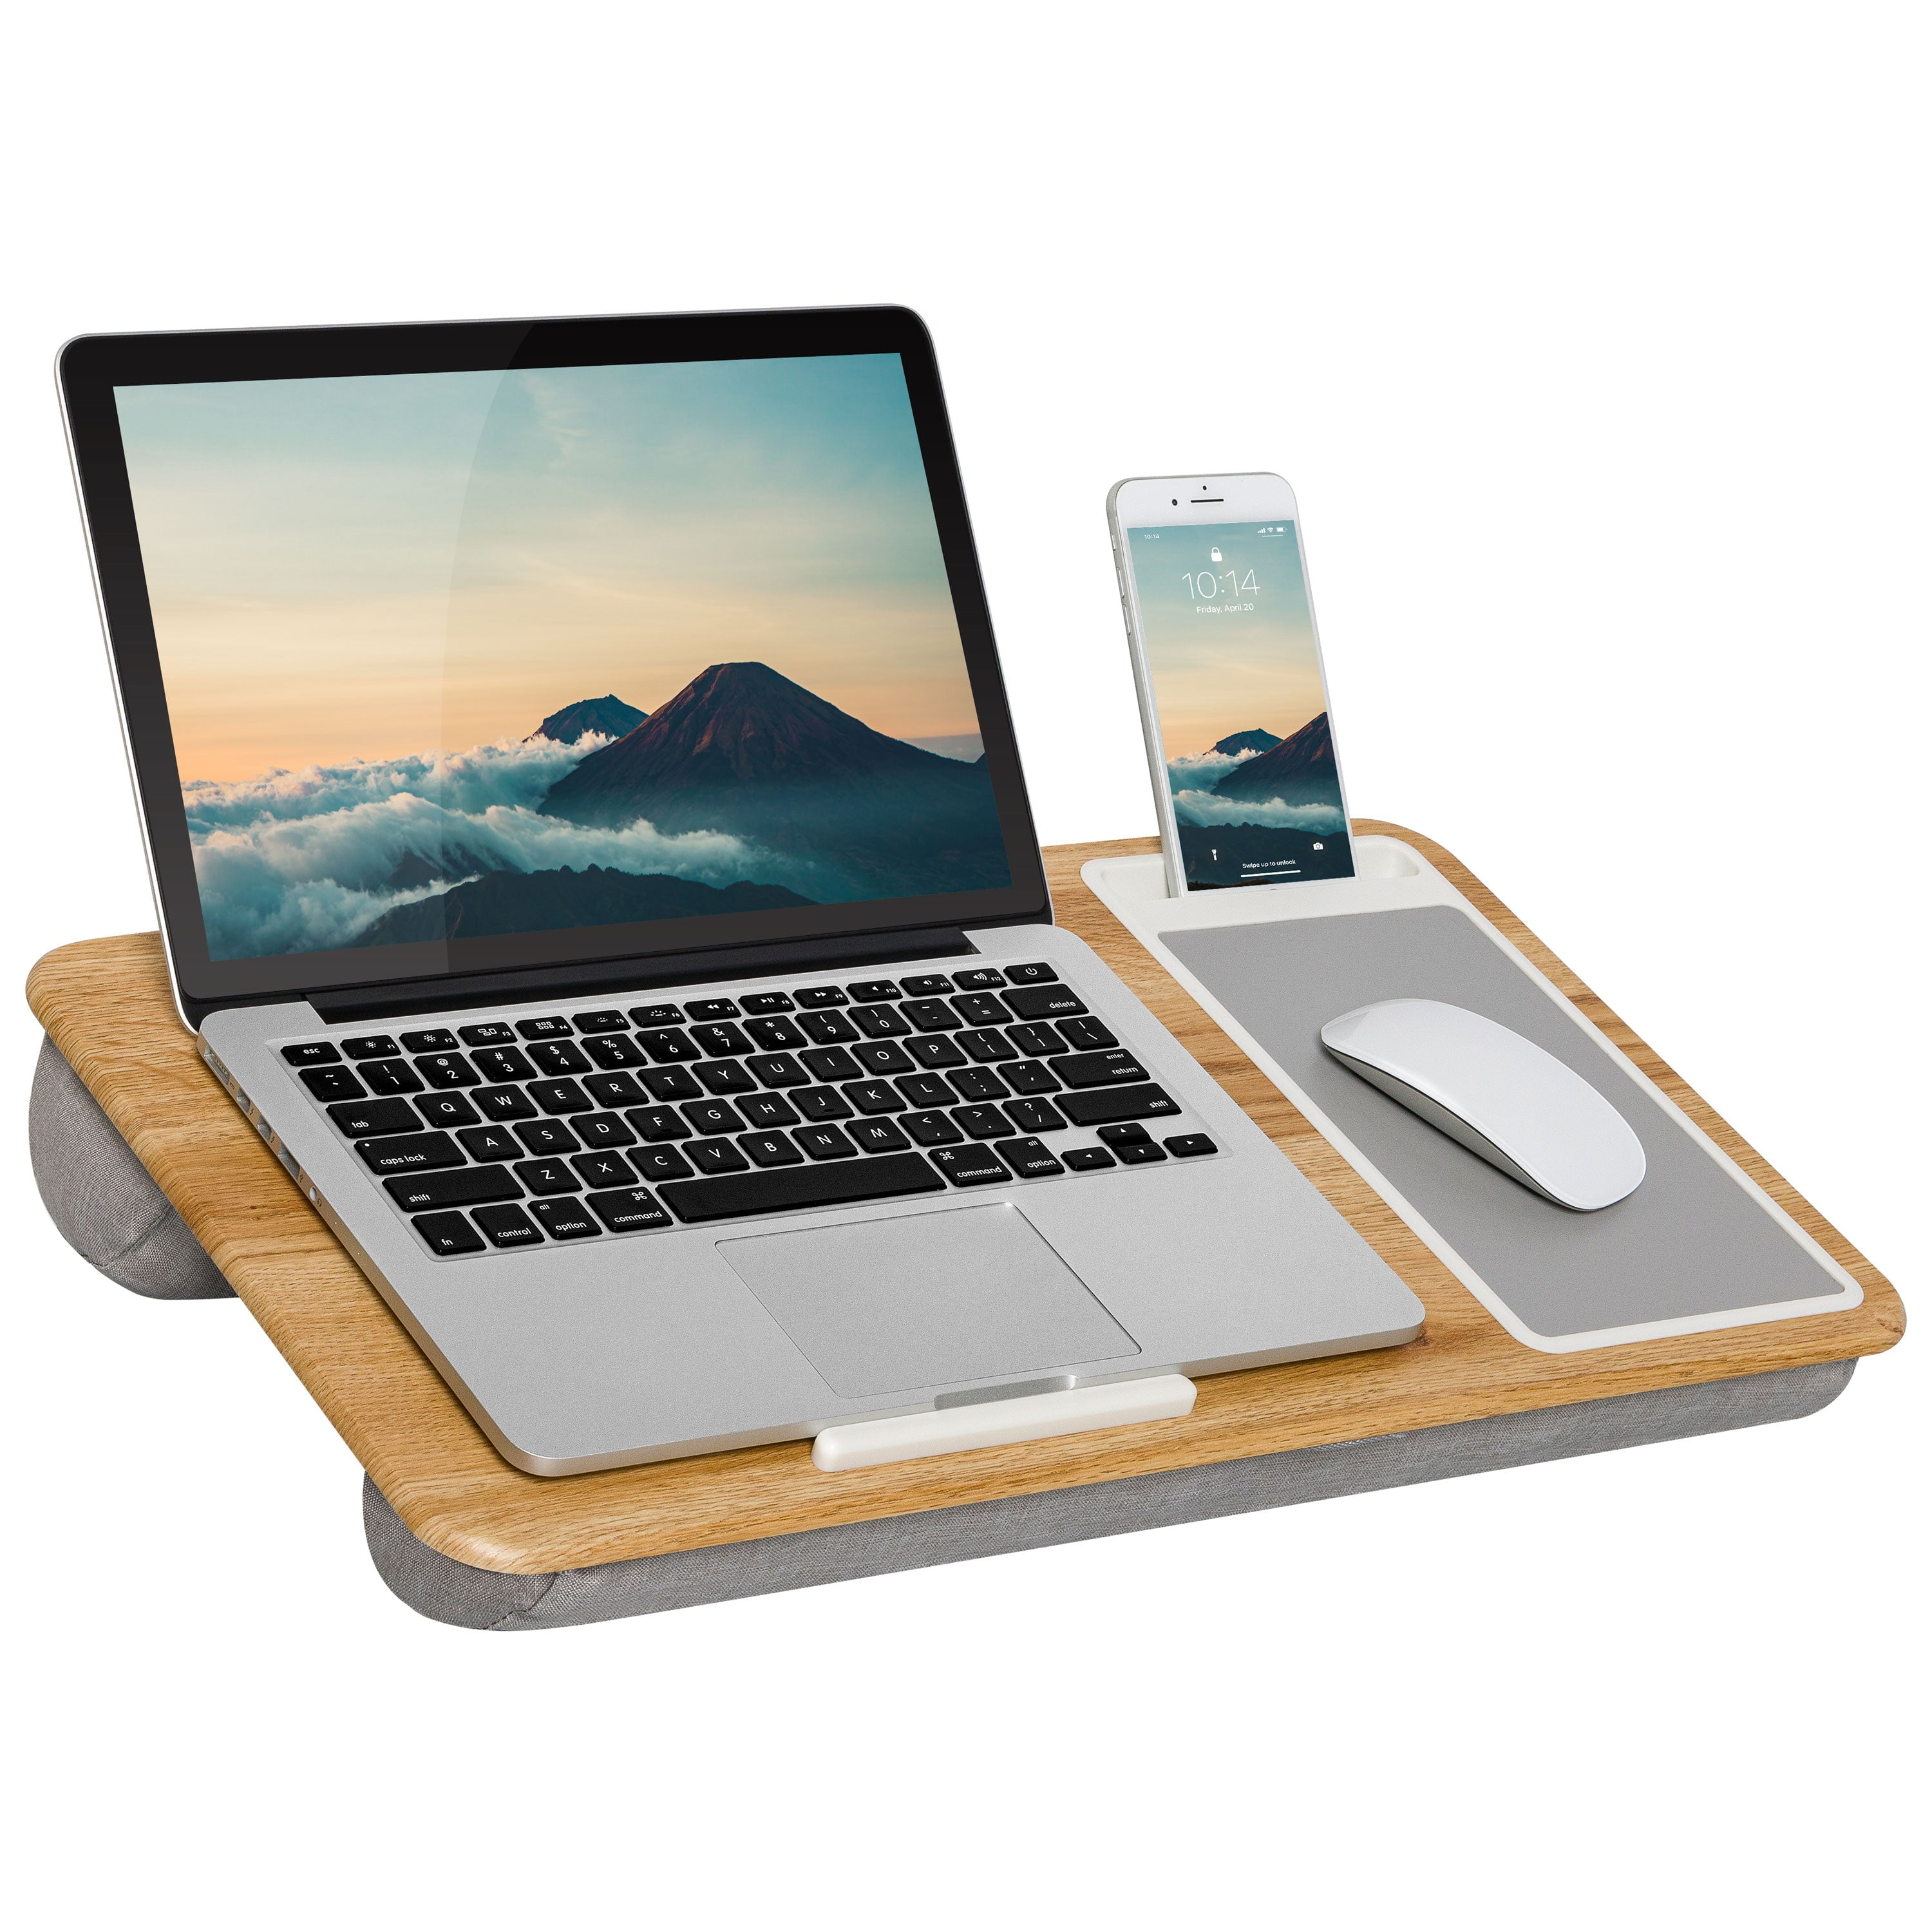  LAPGEAR Bamboo Lap Board with Mouse Pad and Phone Holder -  Natural - Fits up to 15.6 Inch Laptops and Most Tablets - Style No. 77001 :  Home & Kitchen